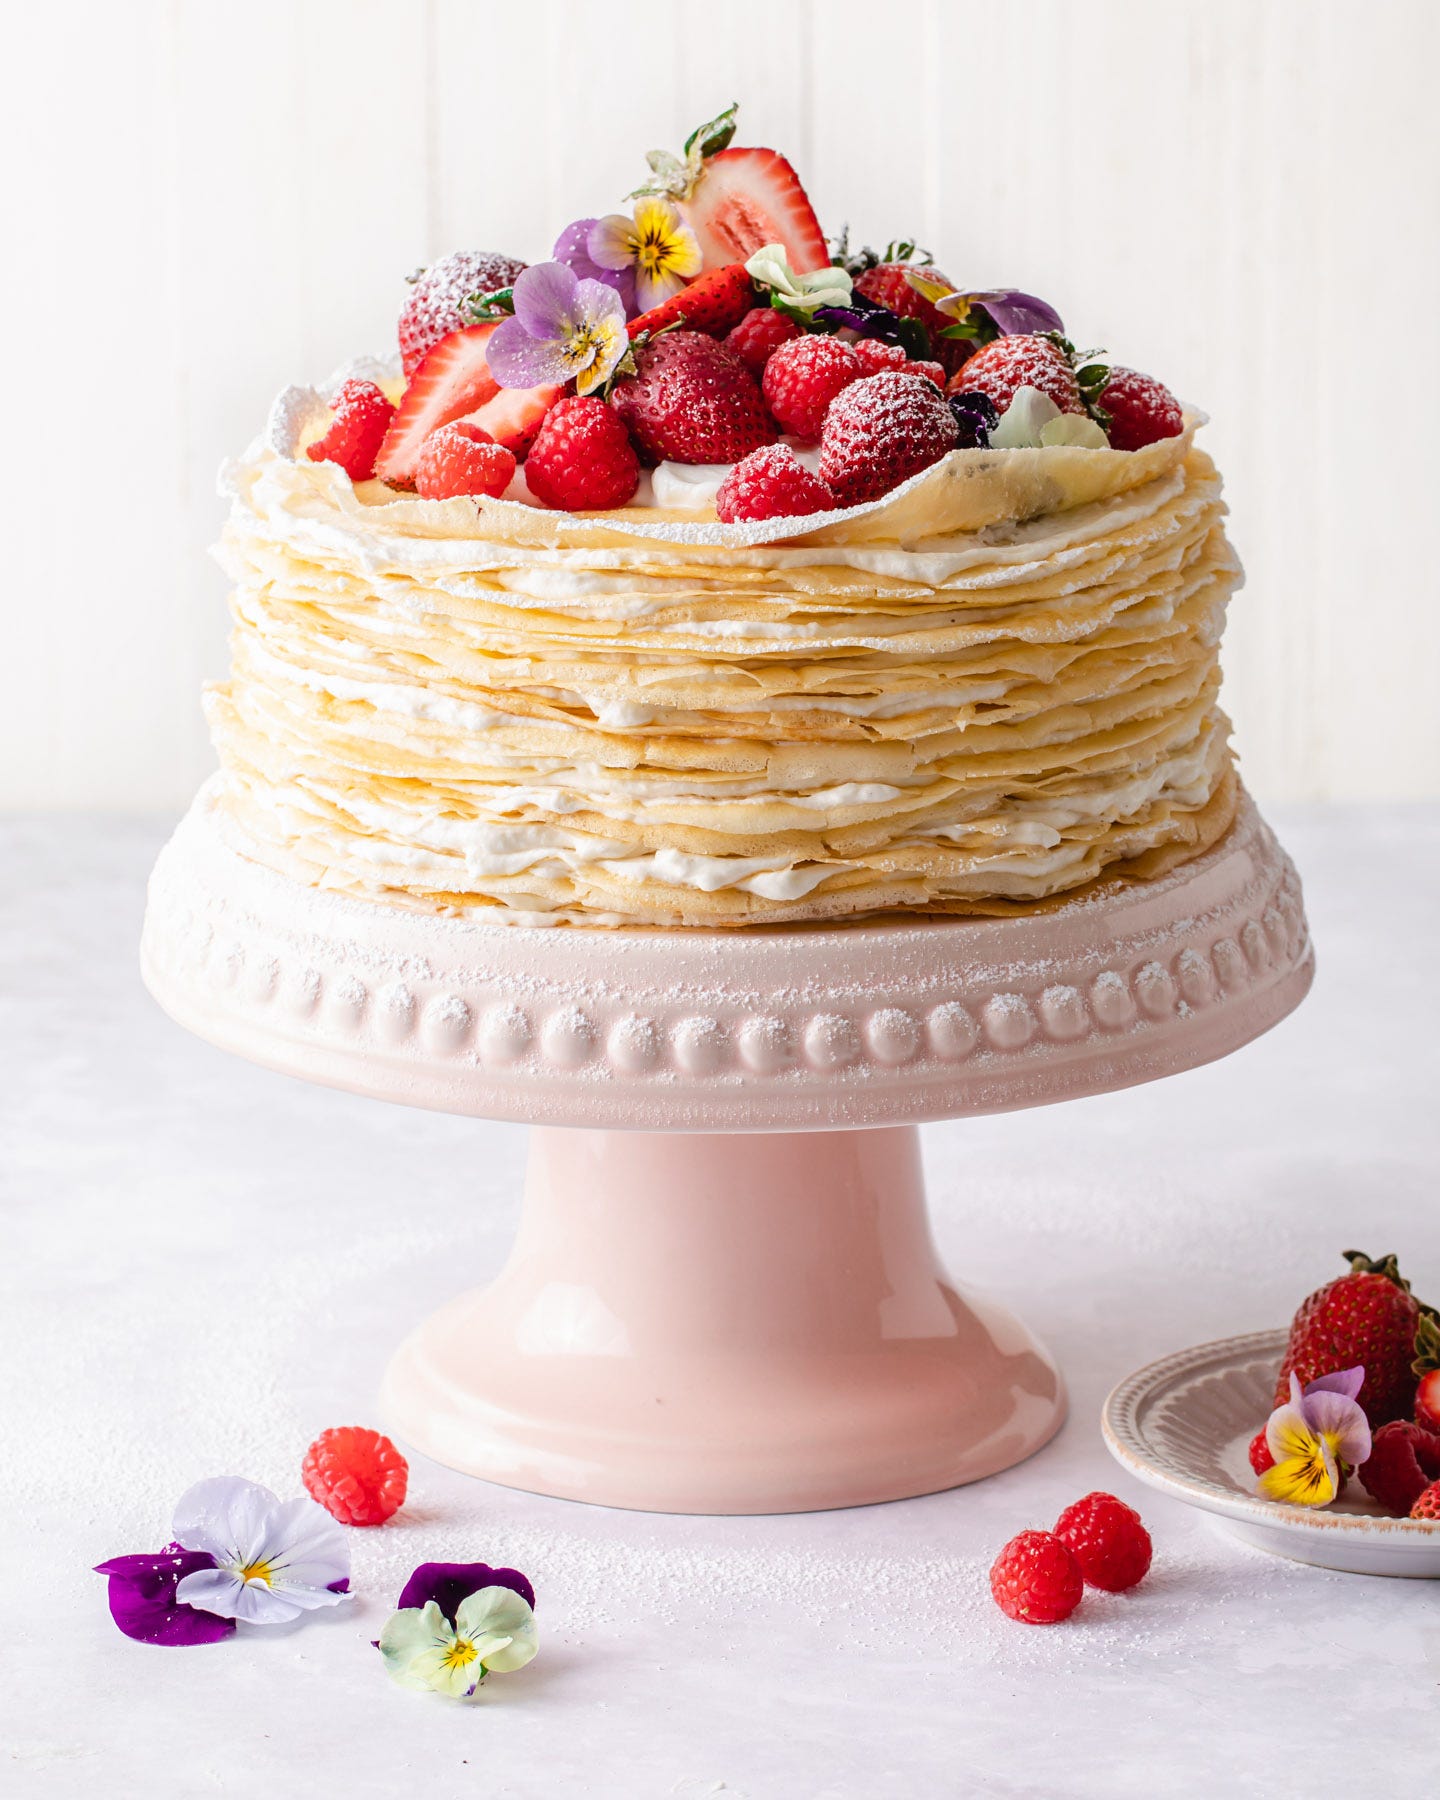 crepe suzette cake recipe (gluten-free) to try - Hanna's Places